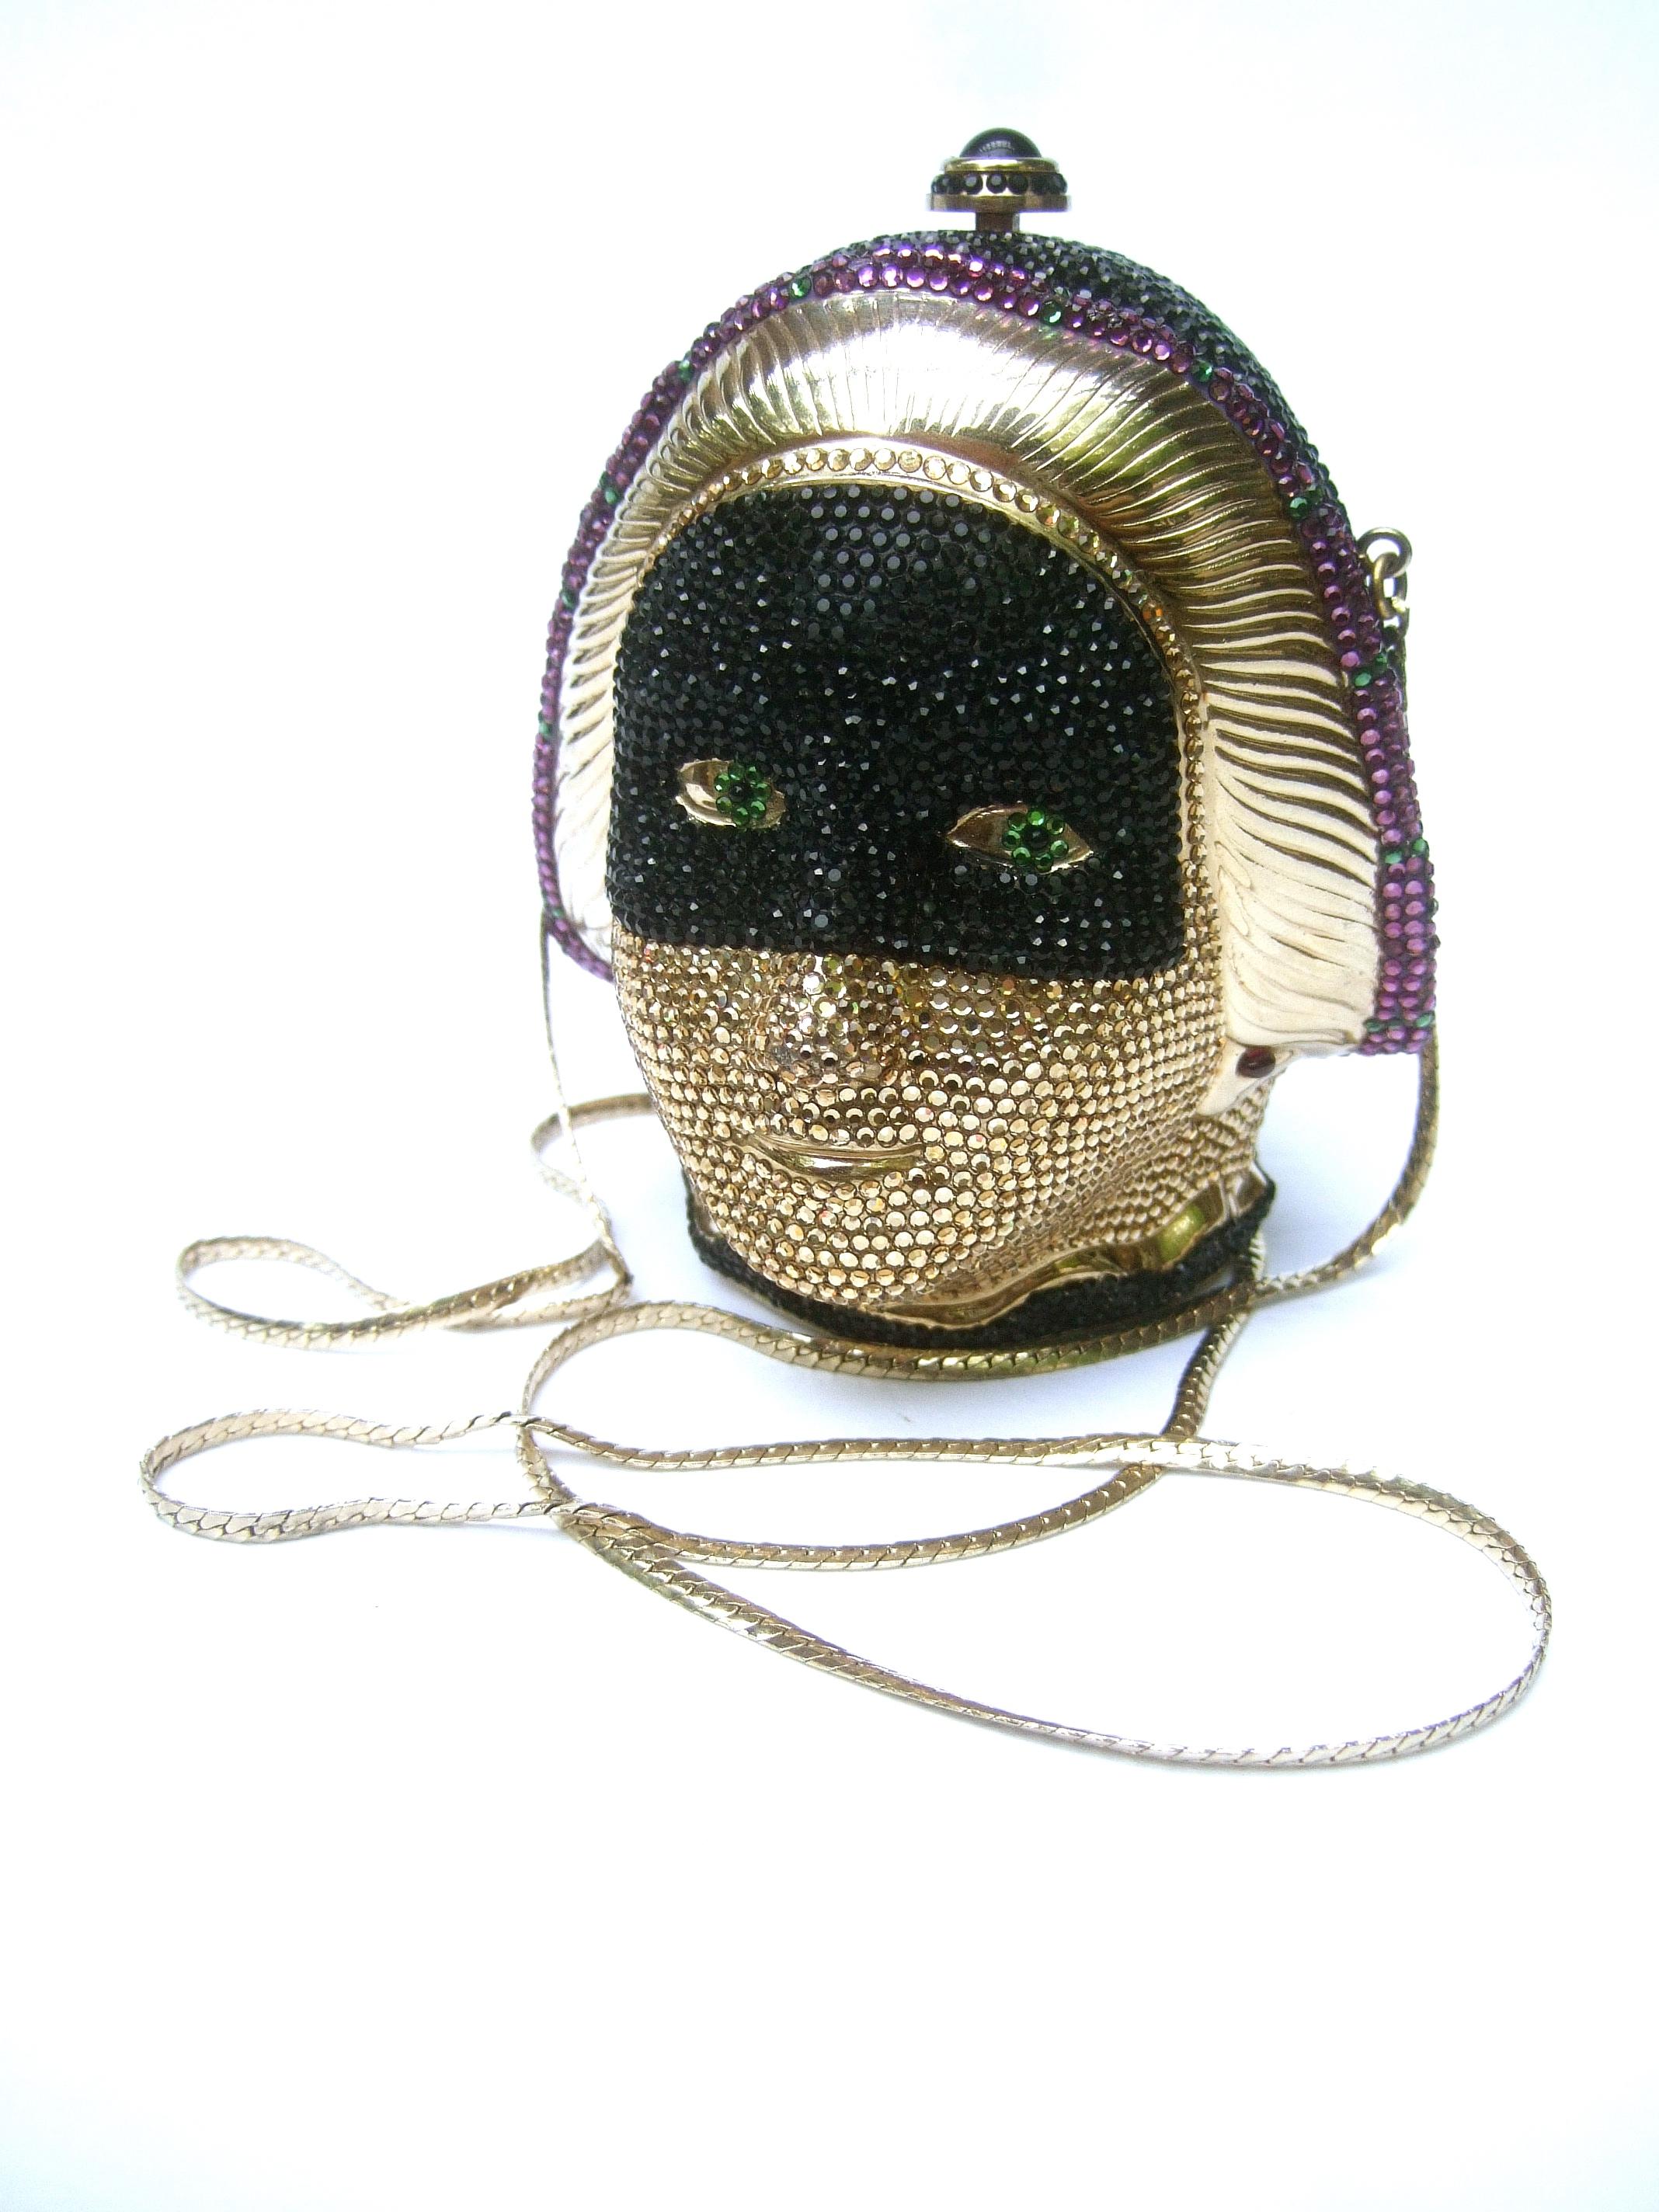 Judith Leiber Exquisite Crystal Encrusted Figural Woman Minaudière circa 1980s For Sale 11